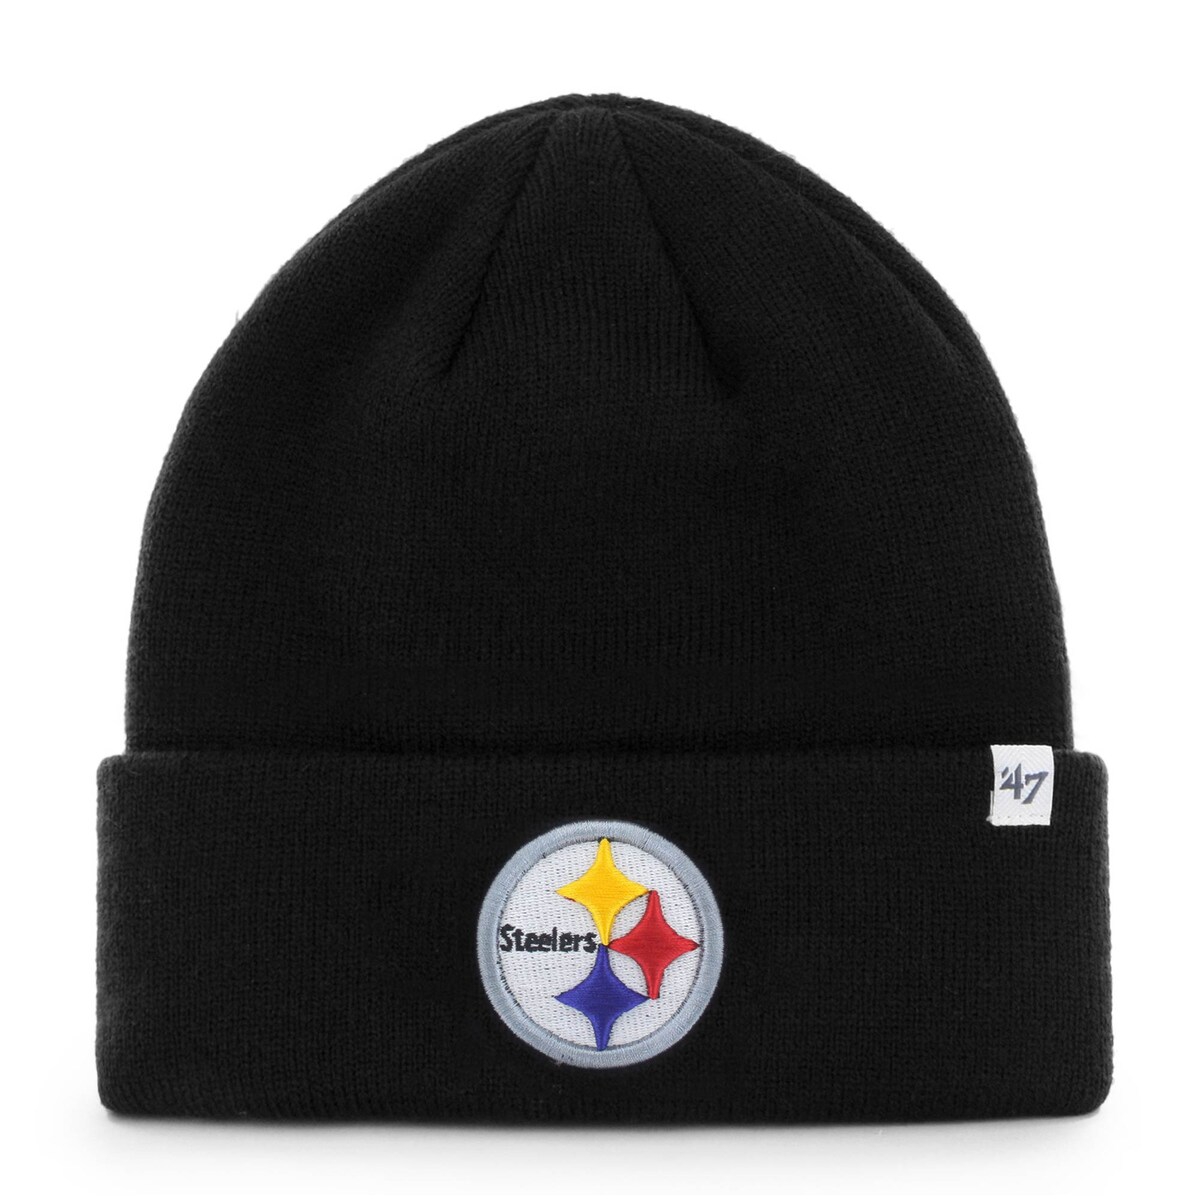 Lids '47 Men's Black Pittsburgh Steelers Primary Basic Cuffed Knit Hat